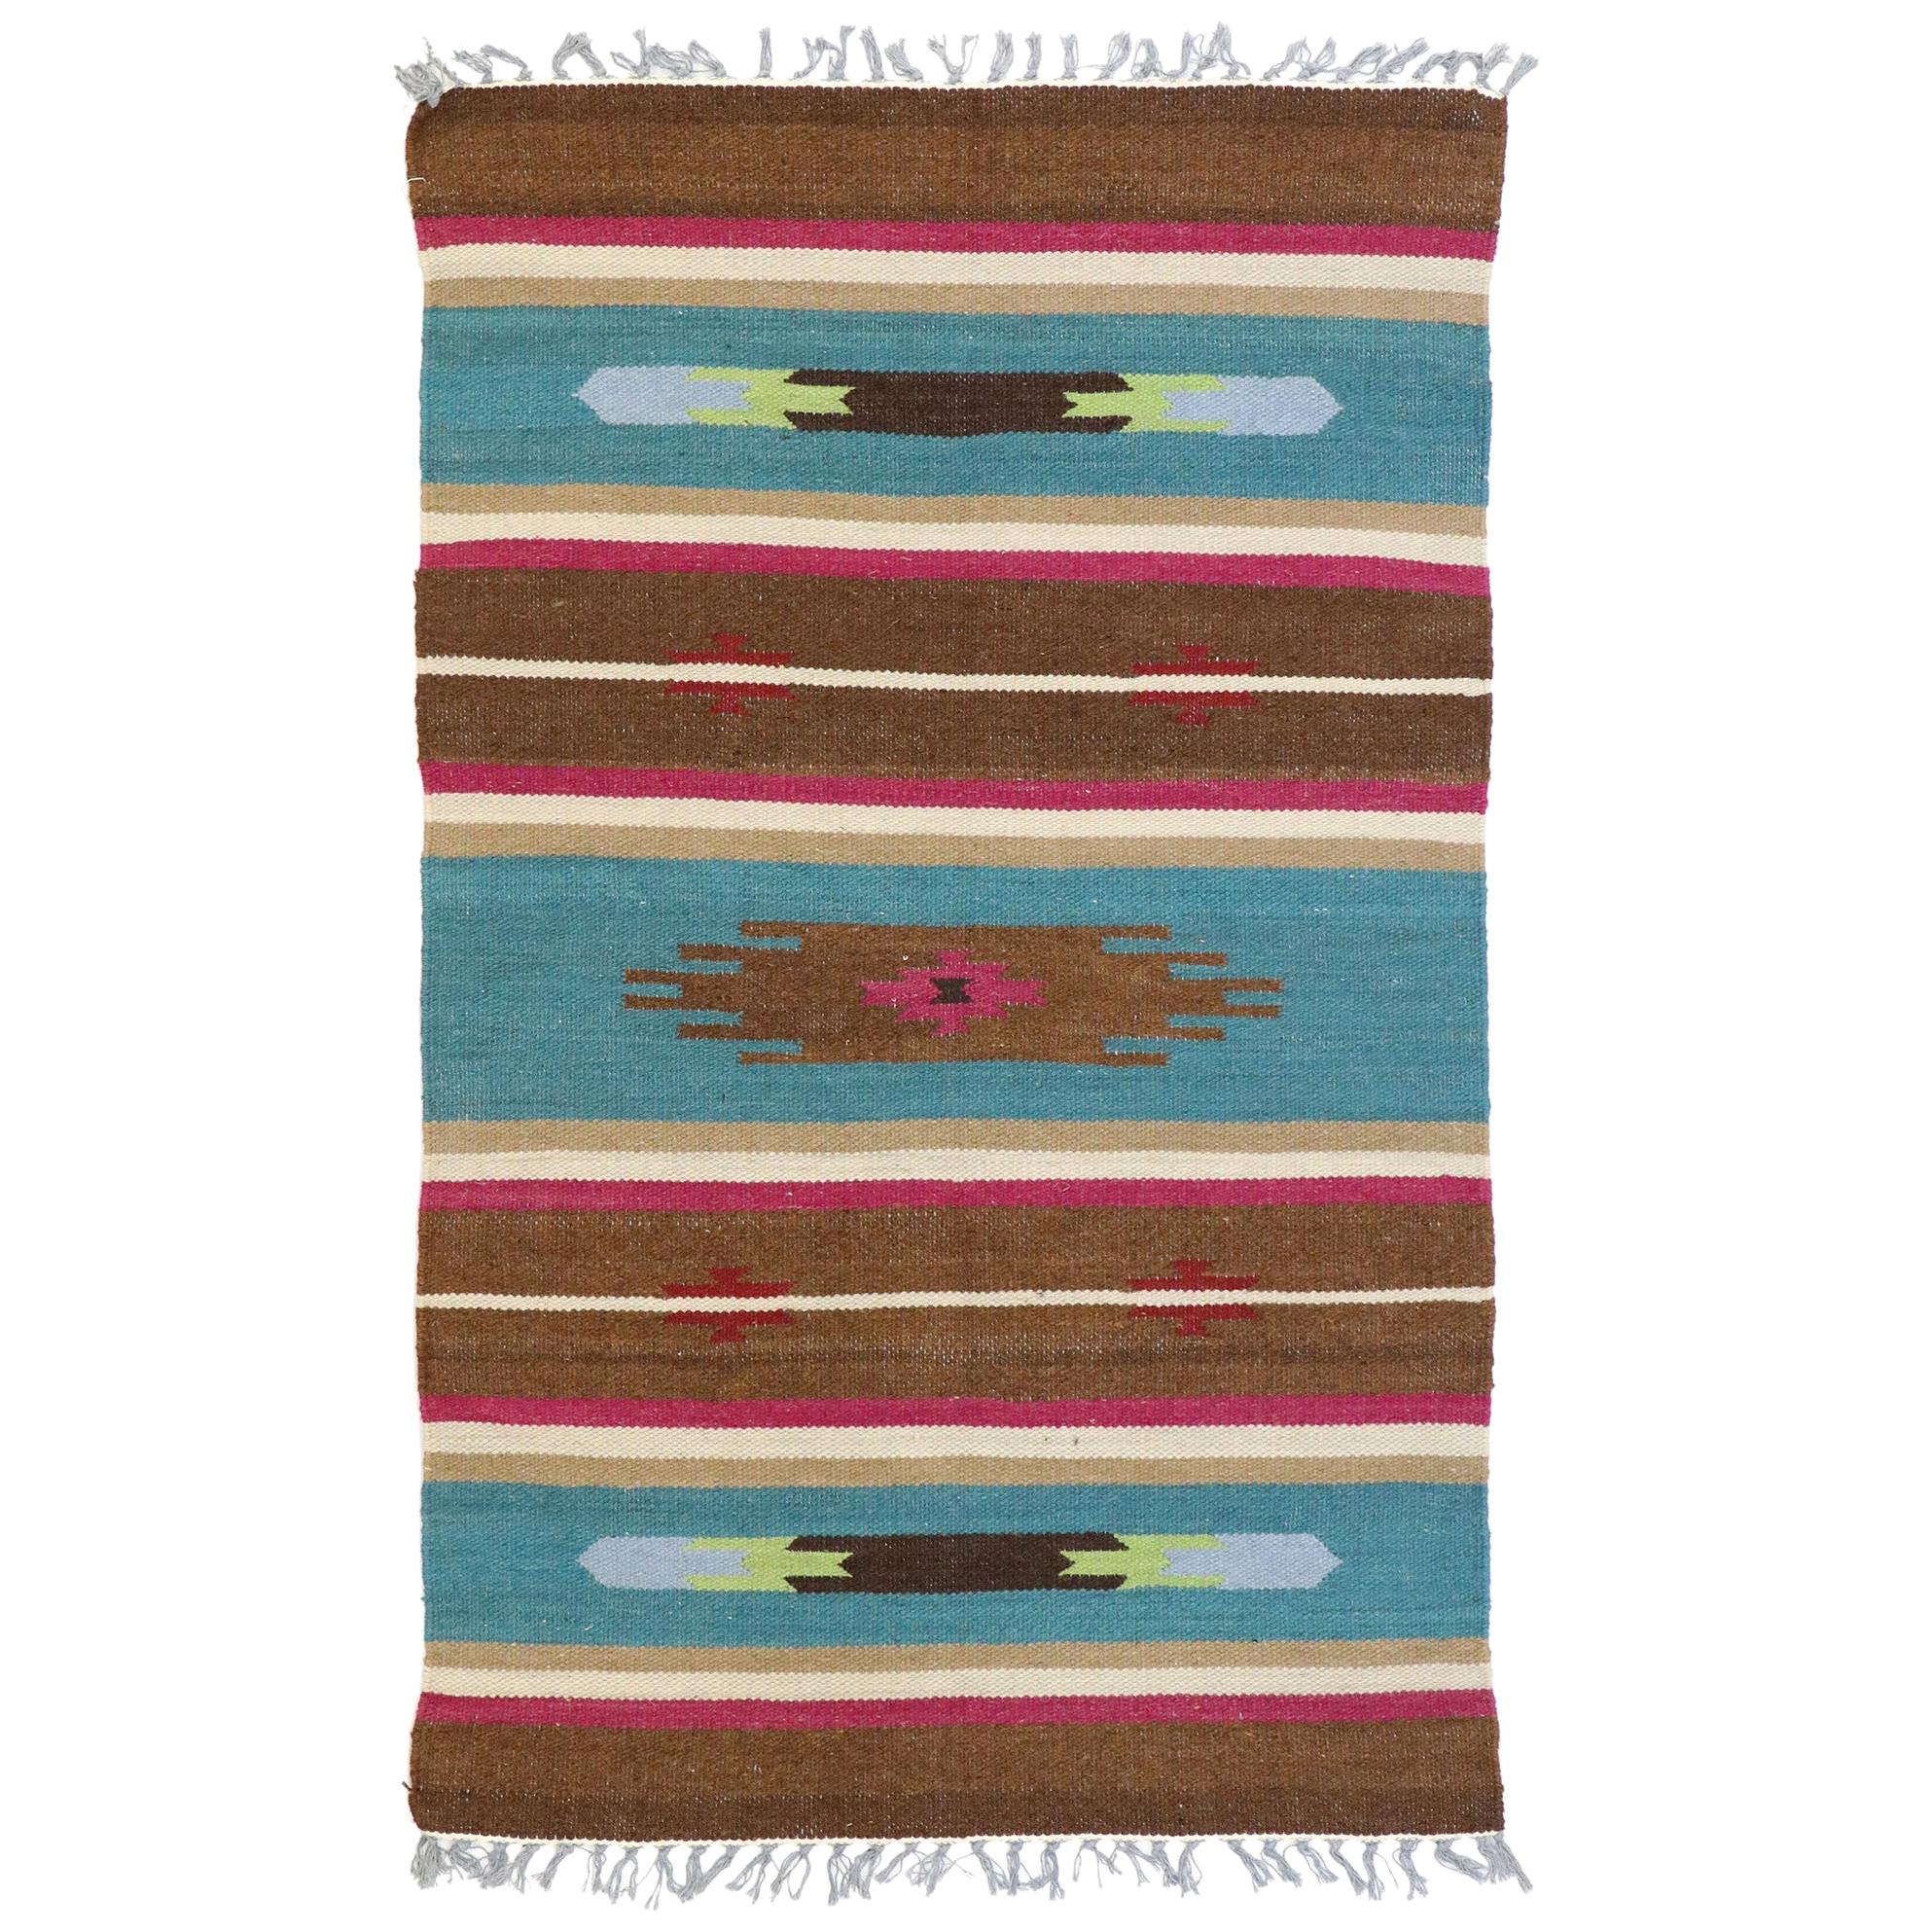 Vintage American Kilim Rug with Modern Mexican Style